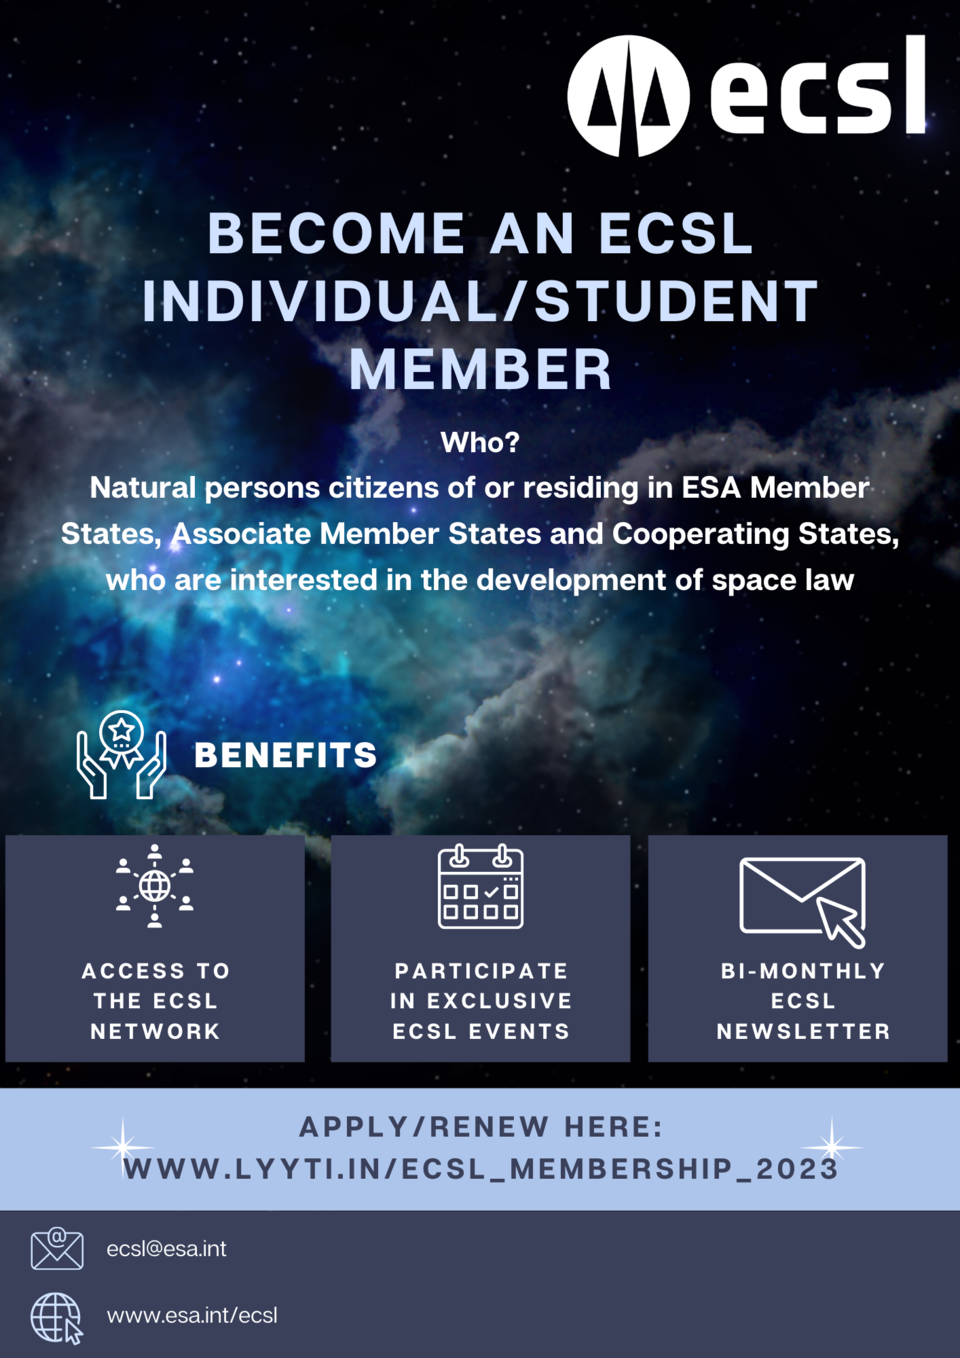 Become an ECSL Individual / Student Member 2023